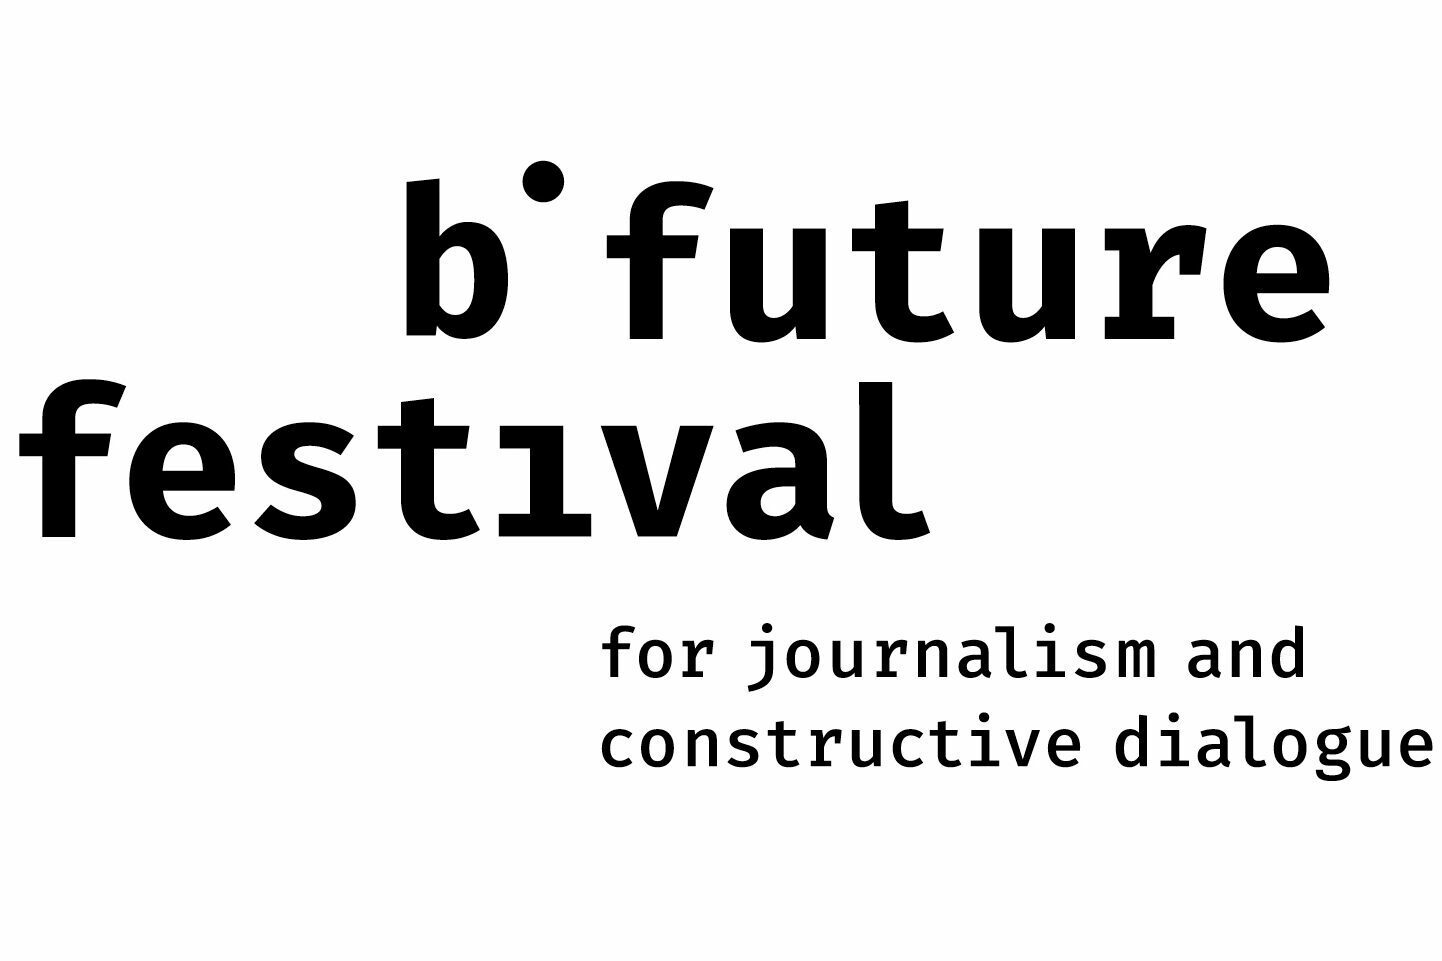 b future festival logo with black text color and white background.